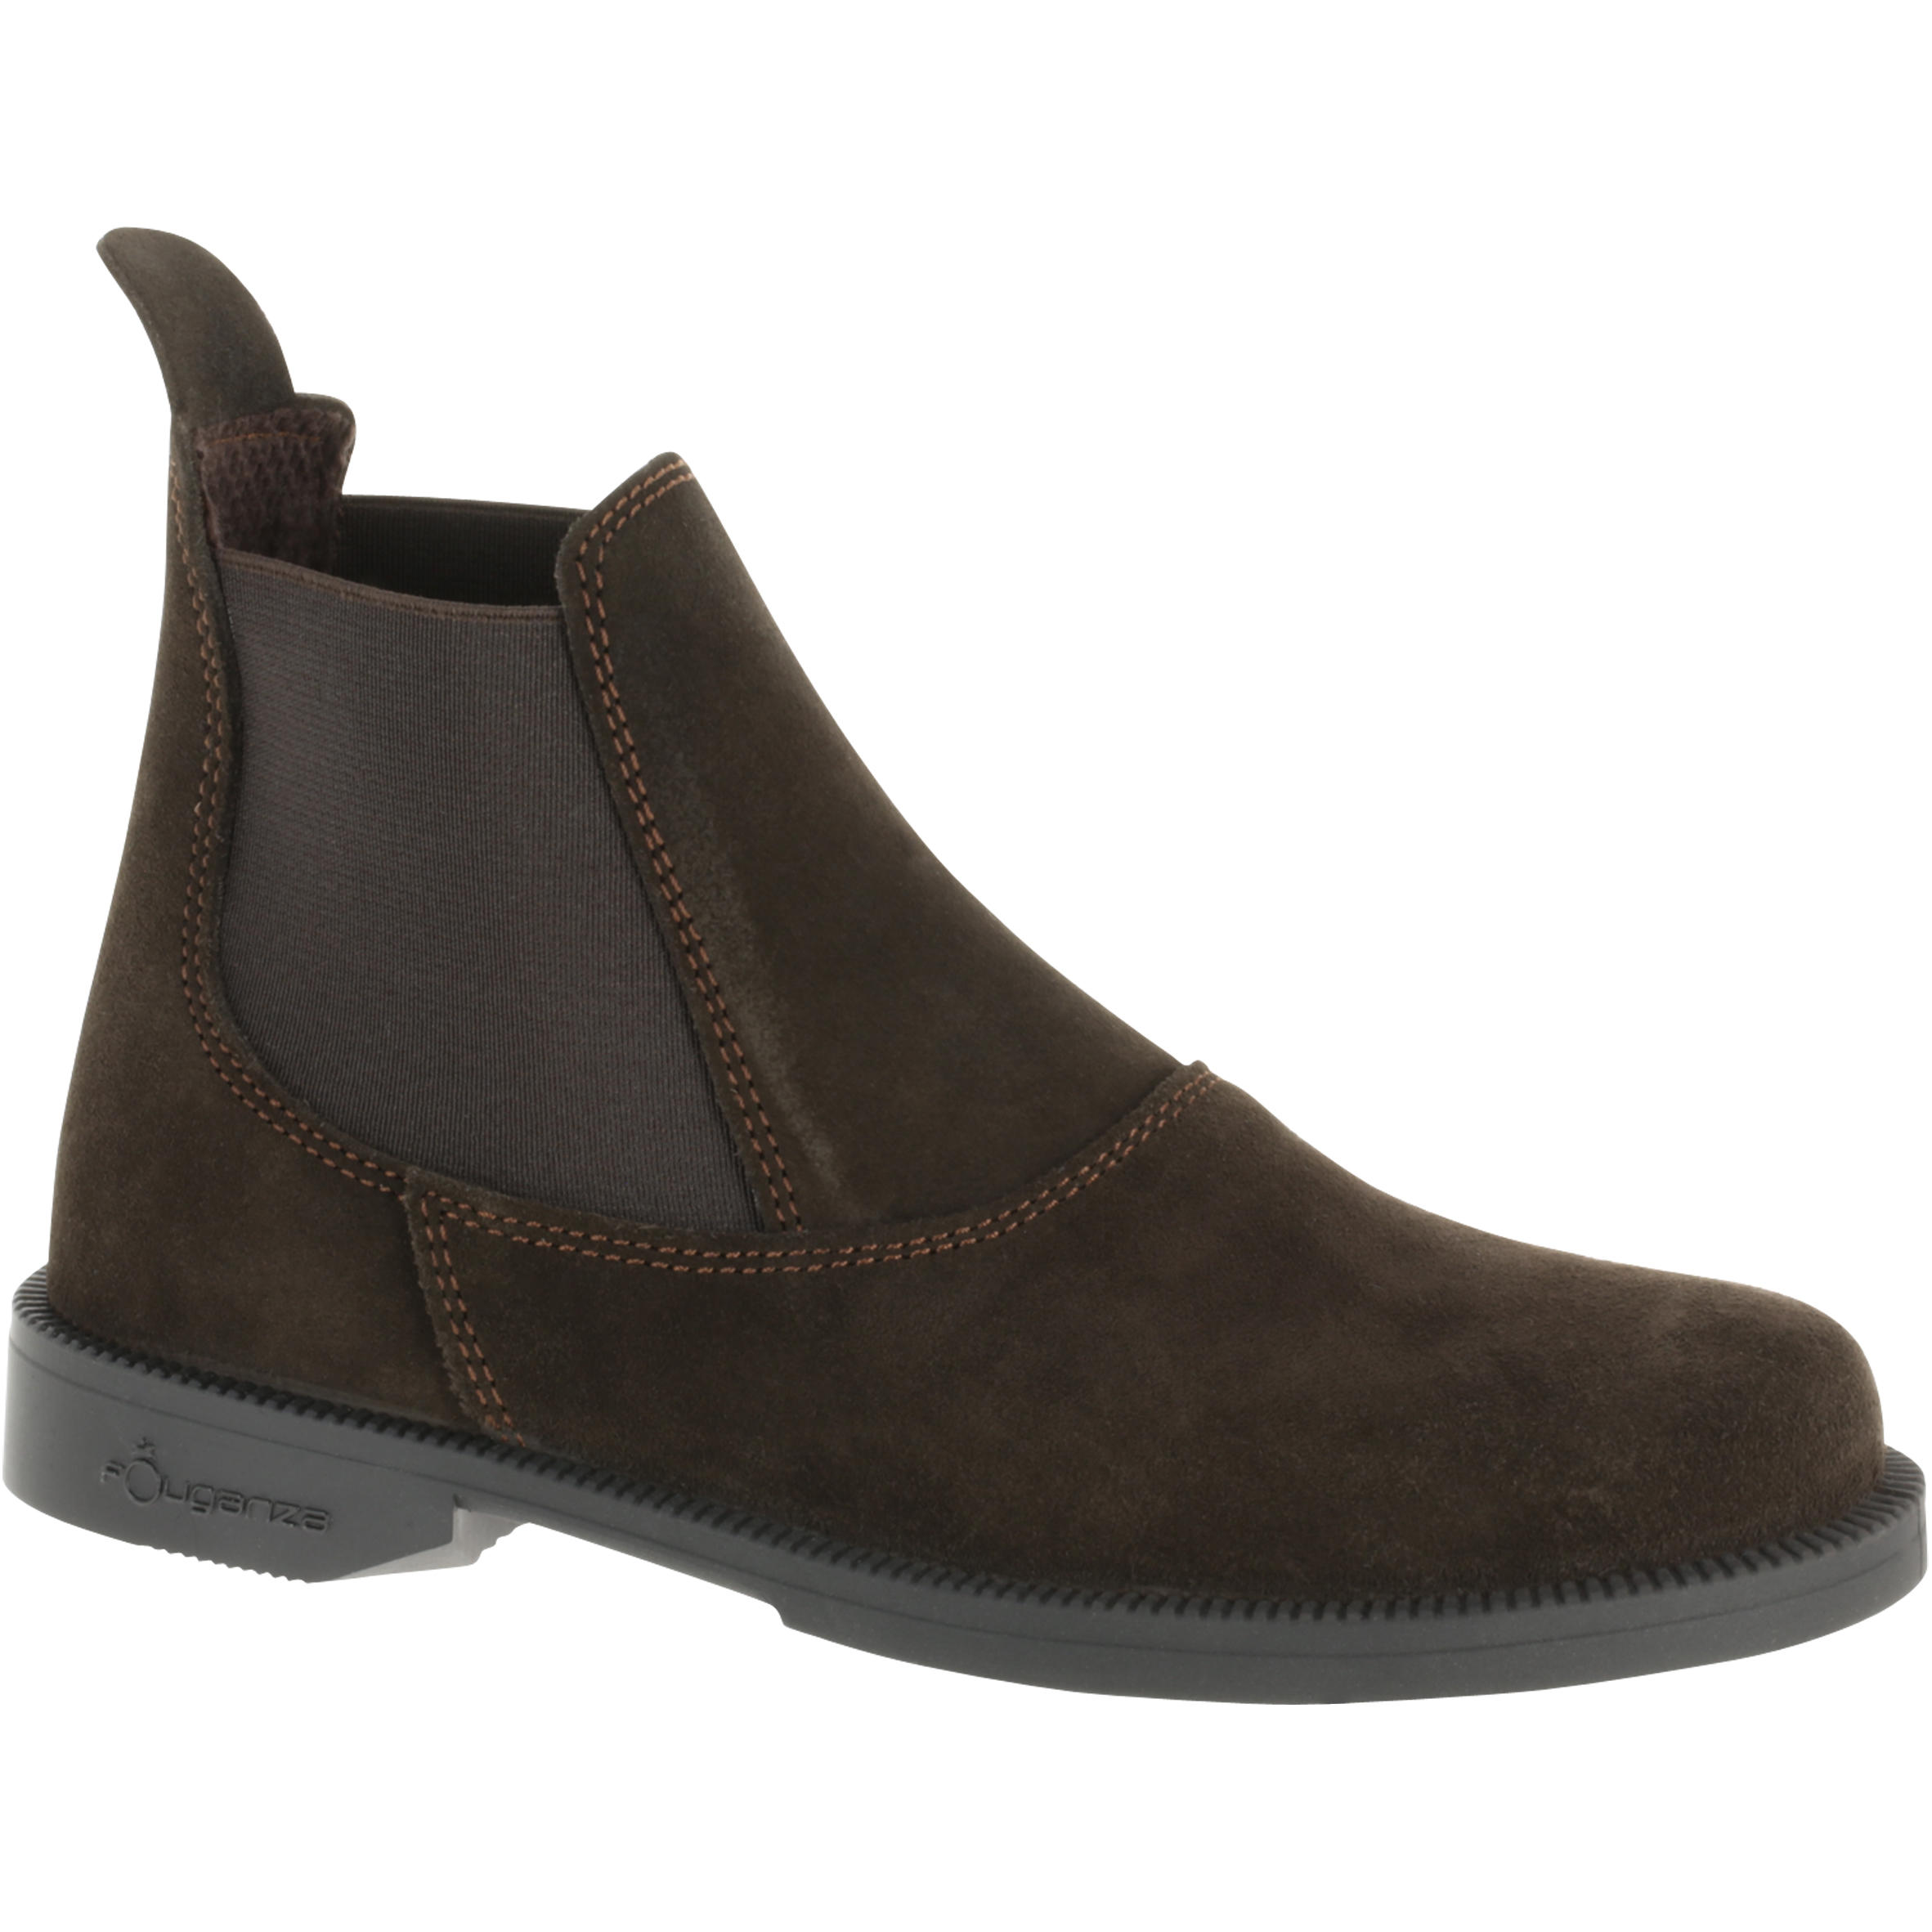 FOUGANZA Kids' Horse Riding Leather Jodhpur Boots Classic - Brown